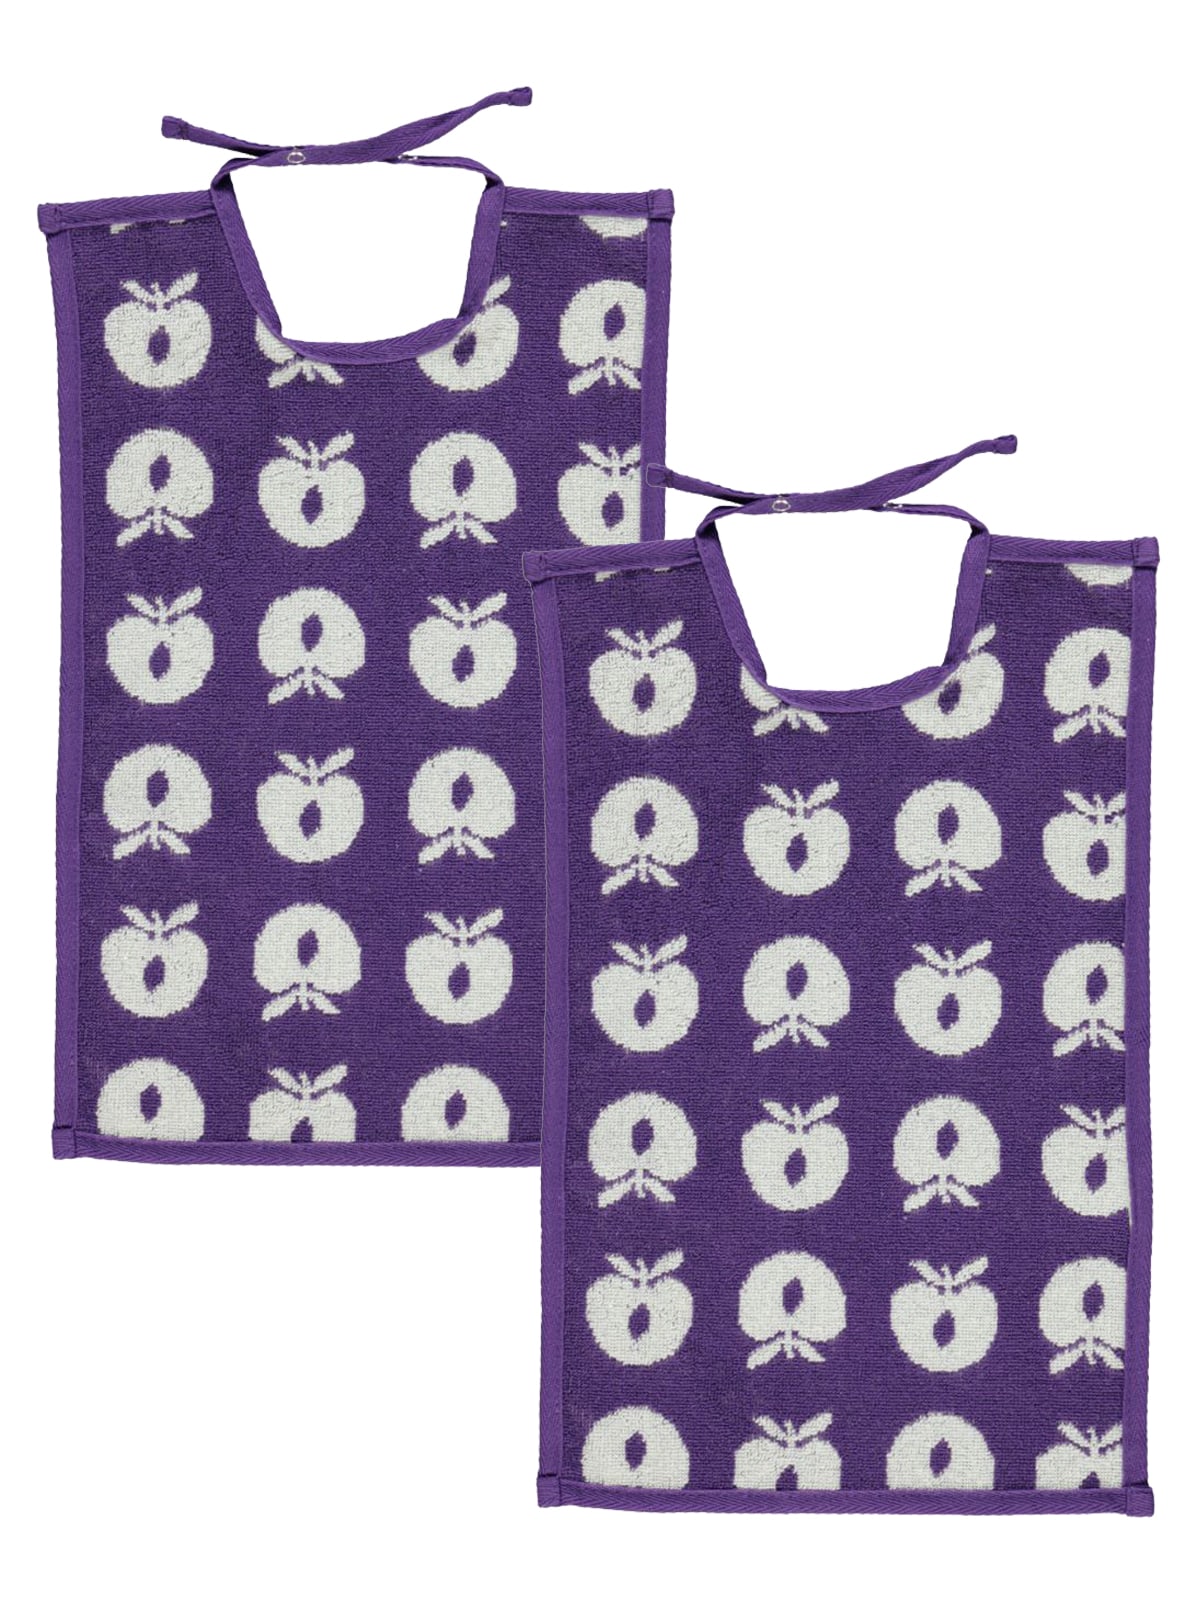 2 packs of large bibs with apples